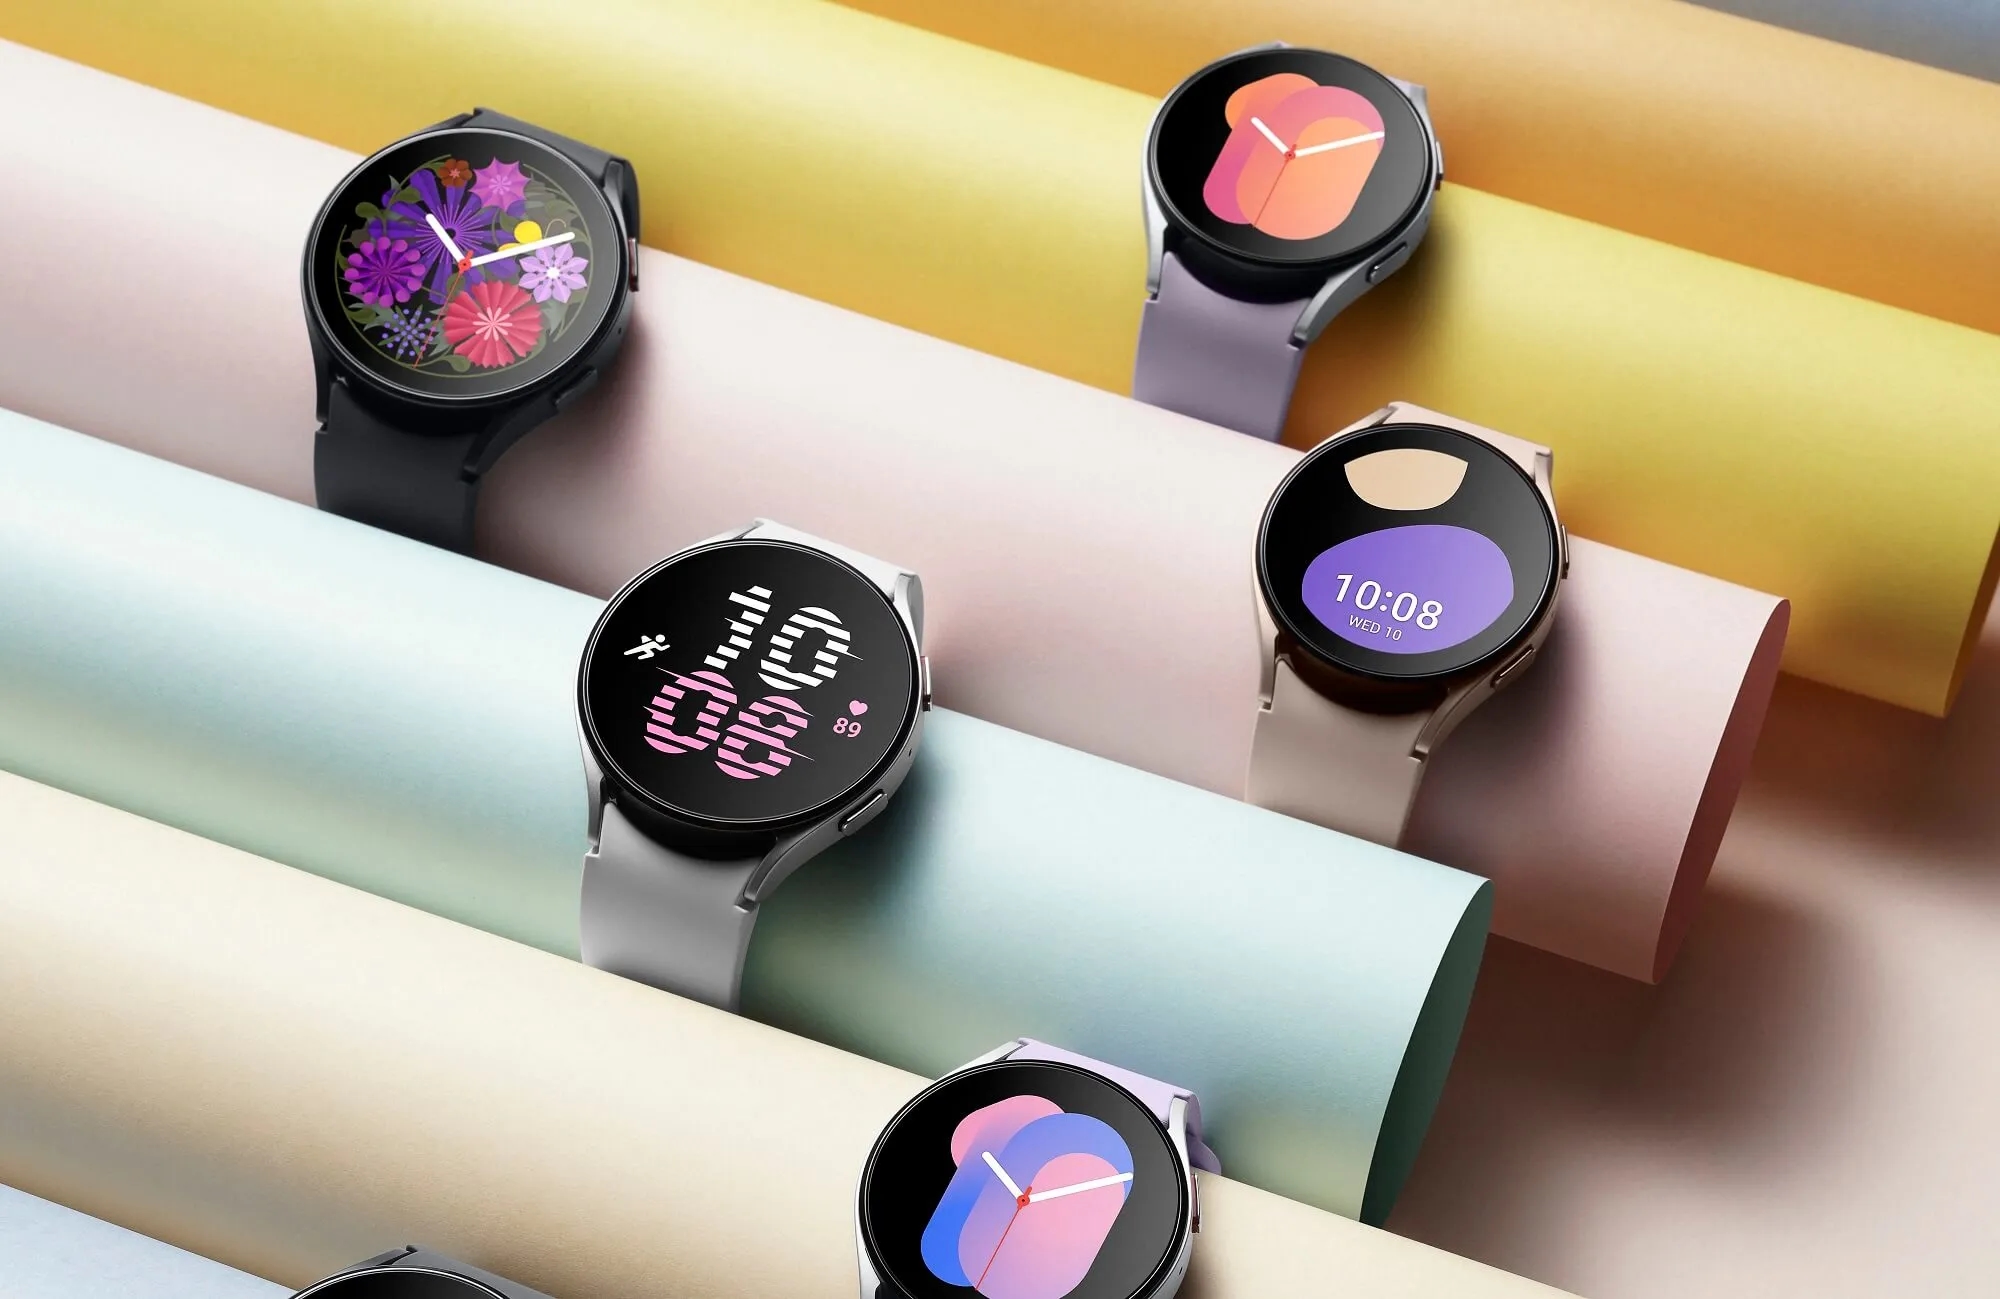 Samsung Galaxy Watch 5 is available at up to $60 off on Amazon